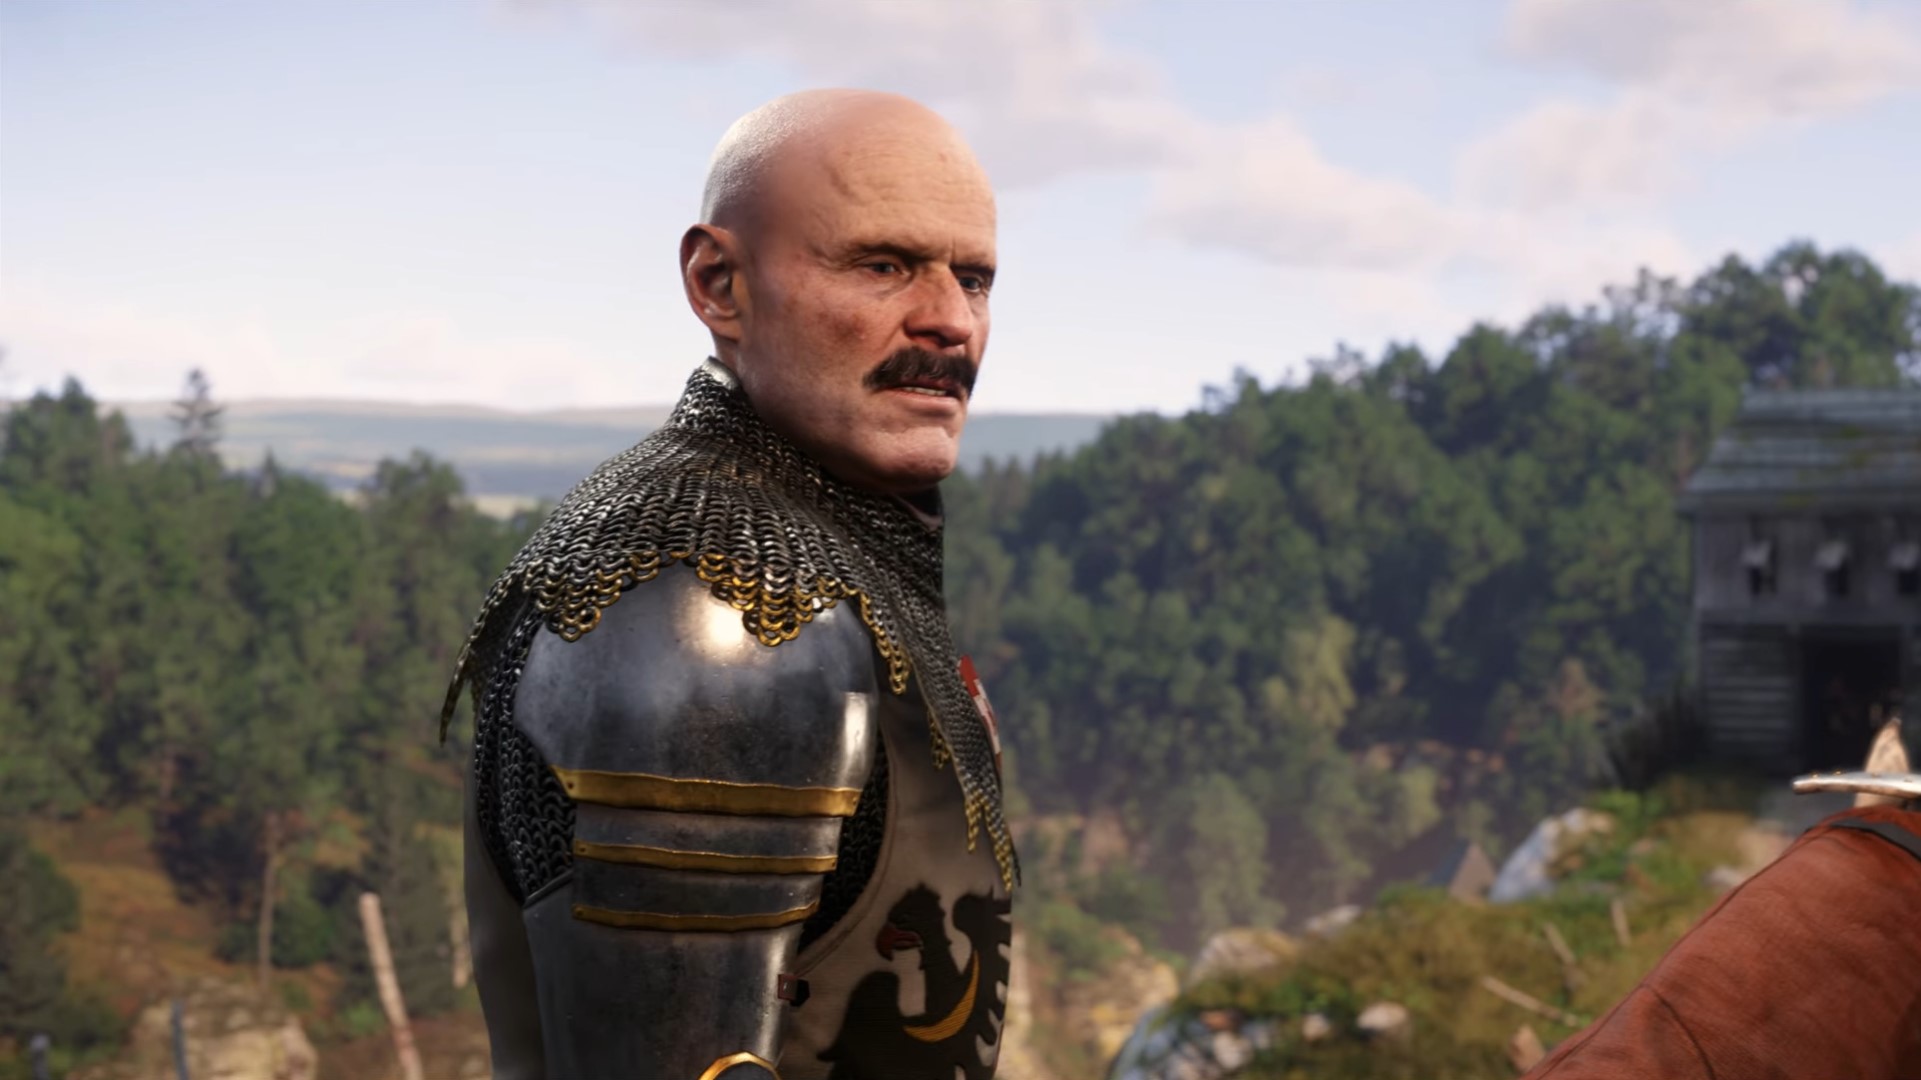 Check out this deep-dive video on Kingdom Come Deliverance 2